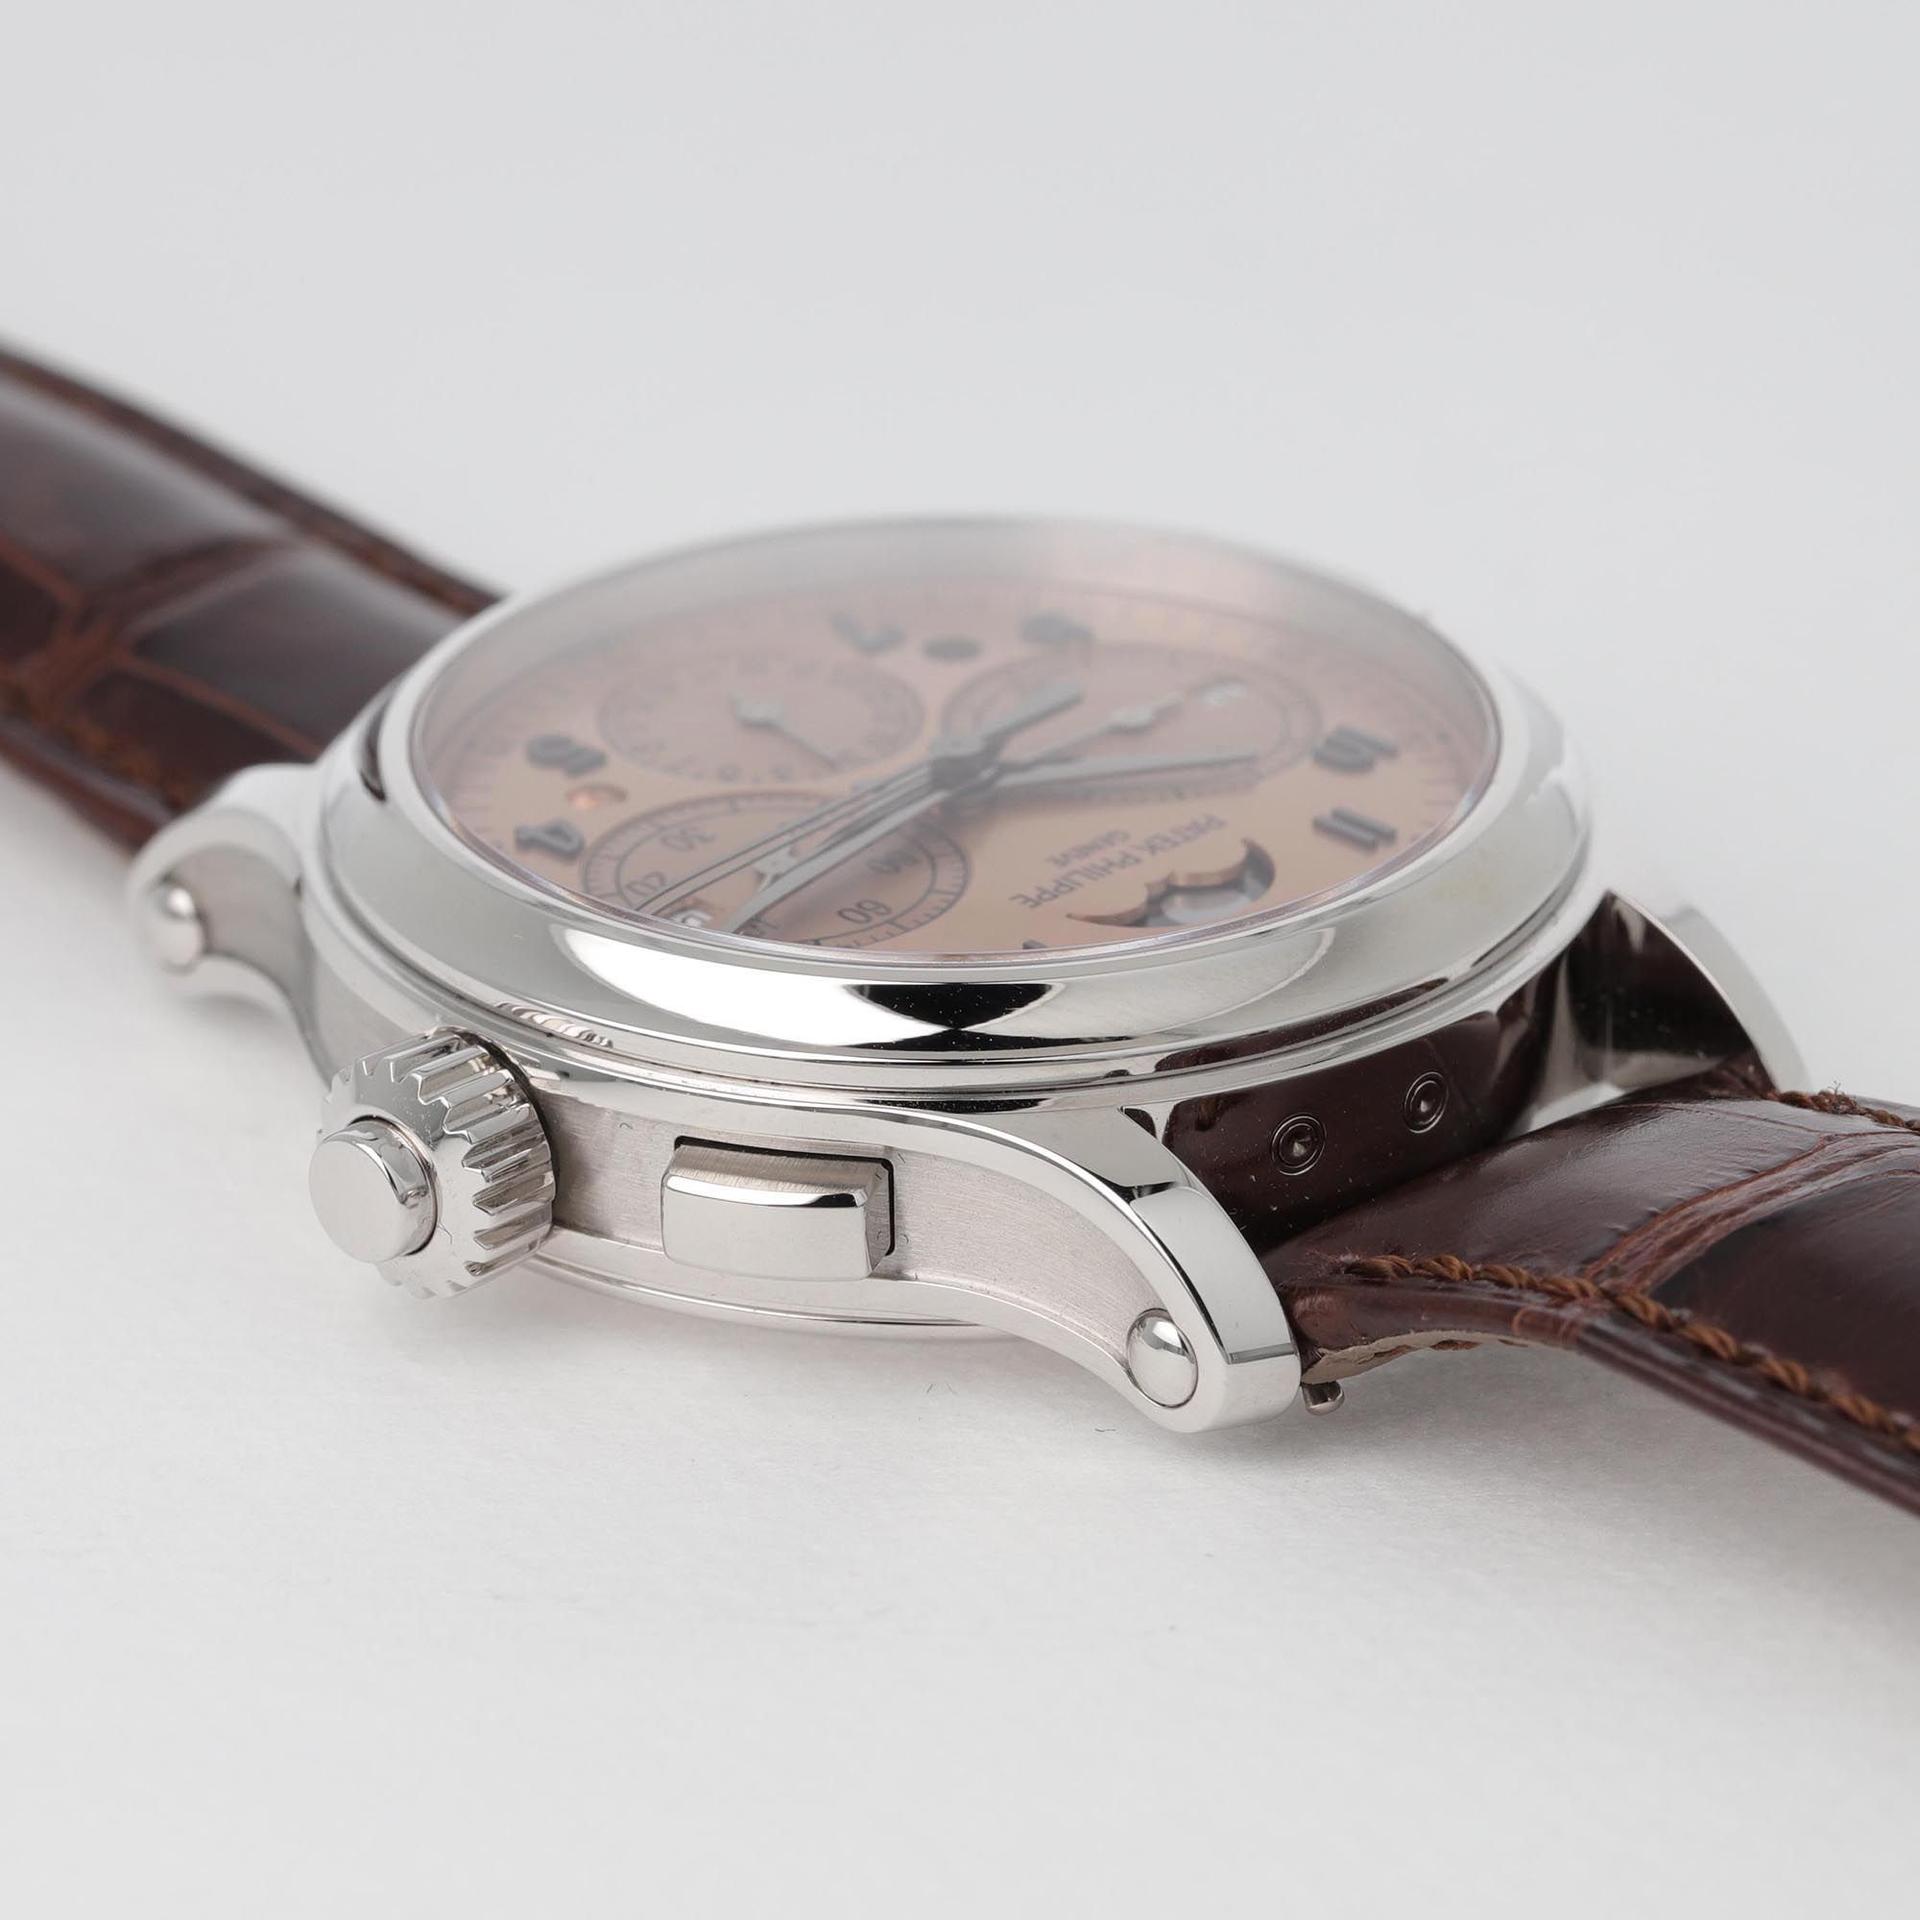 Perpetual Calendar Split-Second Monopusher Chronograph with Salmon dial condition photo